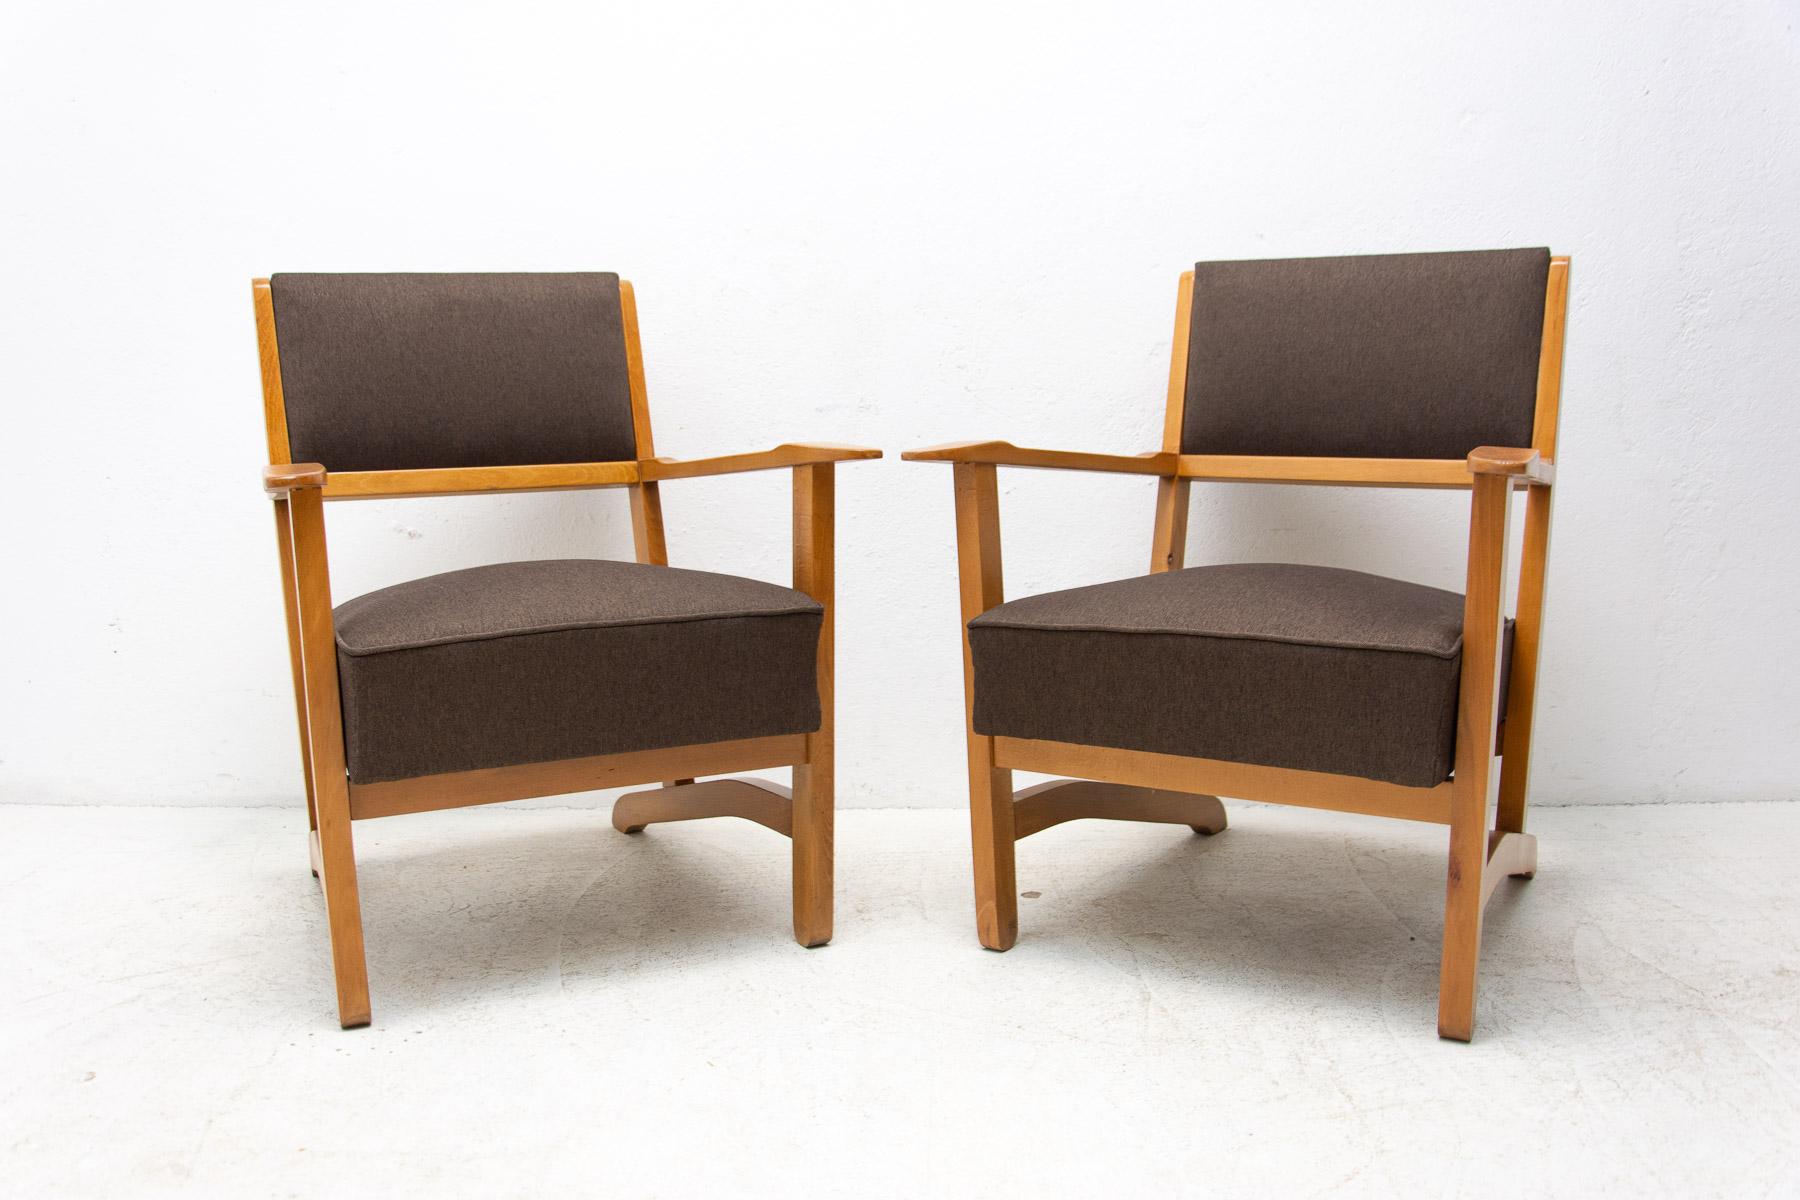 A pair of armchairs in Scandinavian style, made of beech and ash wood, it has removable cushion. Made in the 1970´s. Price is for the pair.

Height: 83 cm

width: 68 cm

depth: 65 cm

Seat height: 46 cm.